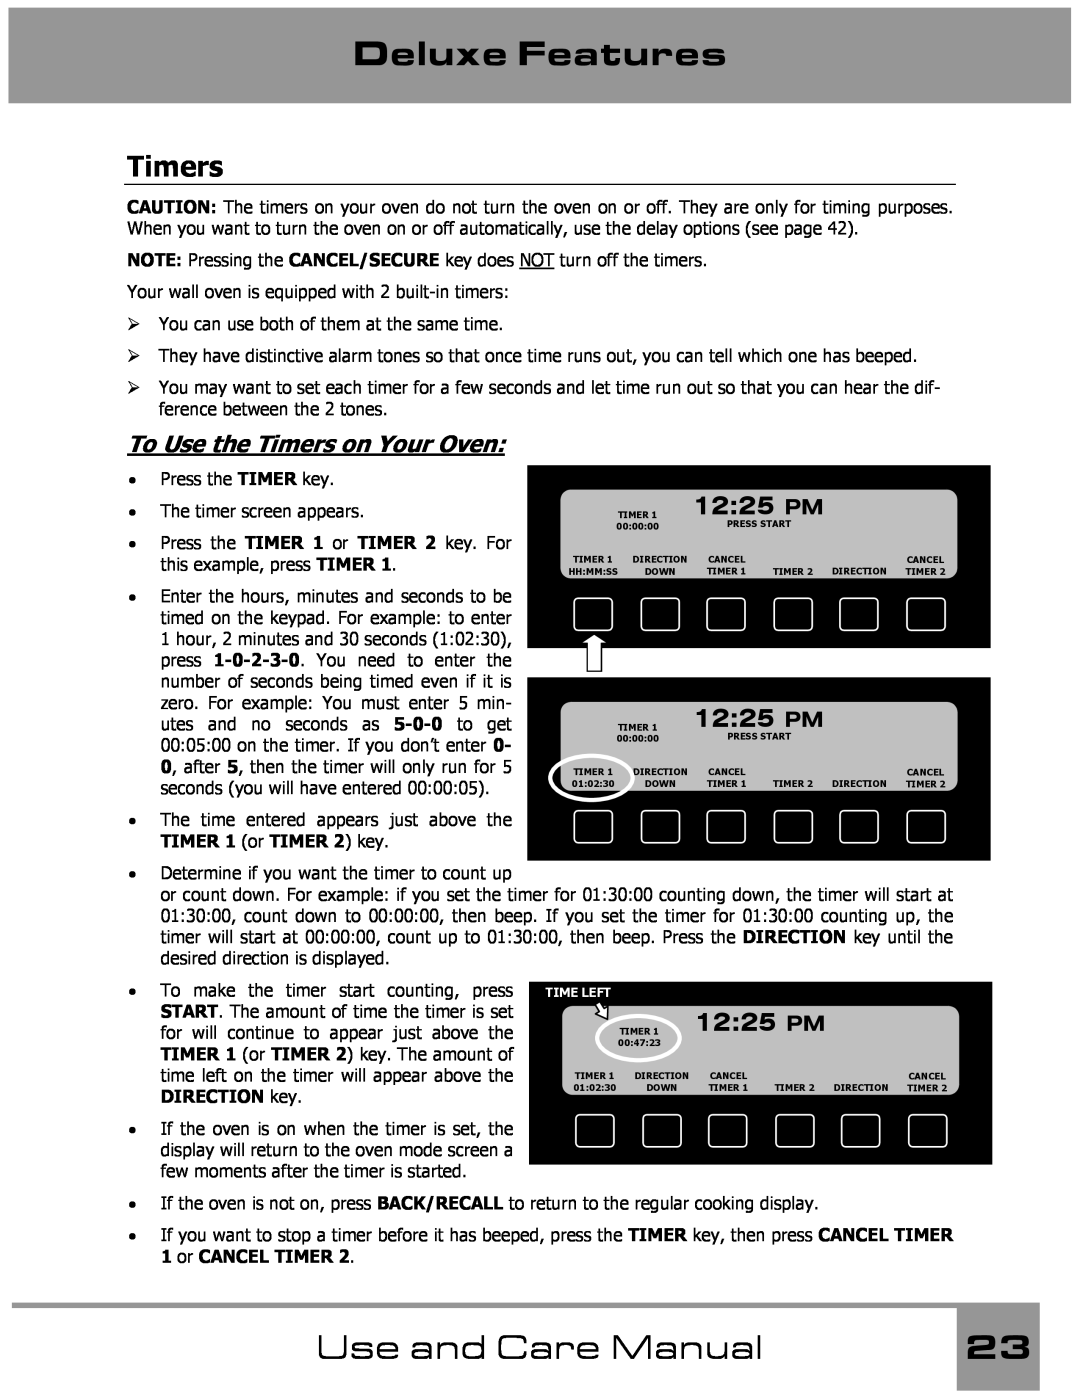 Dacor Wall Oven manual To Use the Timers on Your Oven, Deluxe Features, Use and Care Manual, 1225 PM 